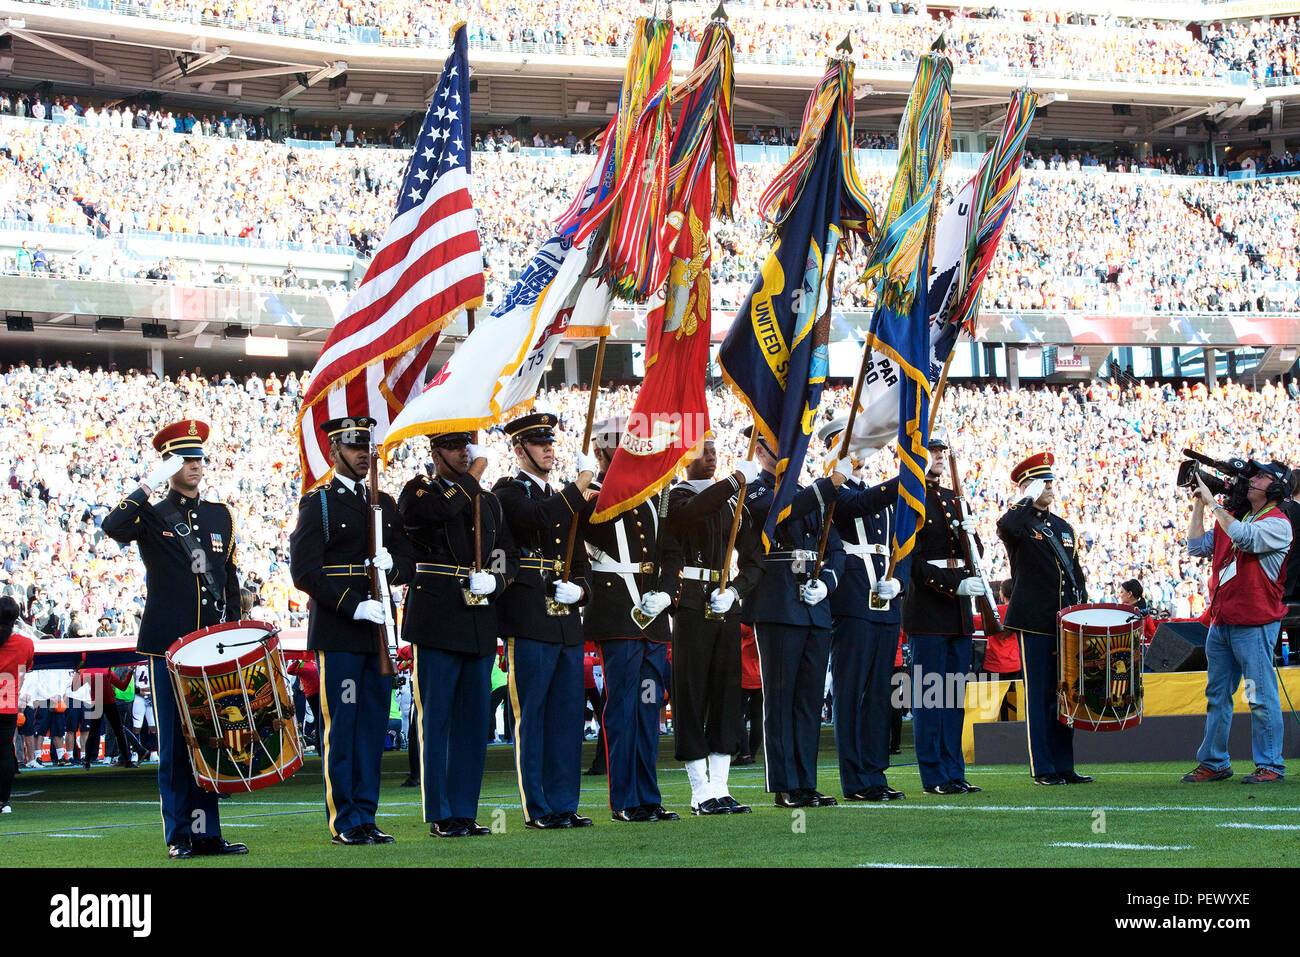 The Joint Armed Forces Color Guard presents the national colors during the signing of the national anthem before the start of Super Bowl 50 Feb. 7 in Levi’s Stadium, Santa Clara, Calif. The opening ceremony included a performance by the Joint Armes Services Choir followed by the singing of the National Anthem by Lady Gaga. Members of The U.S. Army Band “Pershing’s Own” and the U.S. Army Military District of Washington participated in the opening ceremony. (U.S. Army Photo by Spc. Brandon C. Dyer) Stock Photo